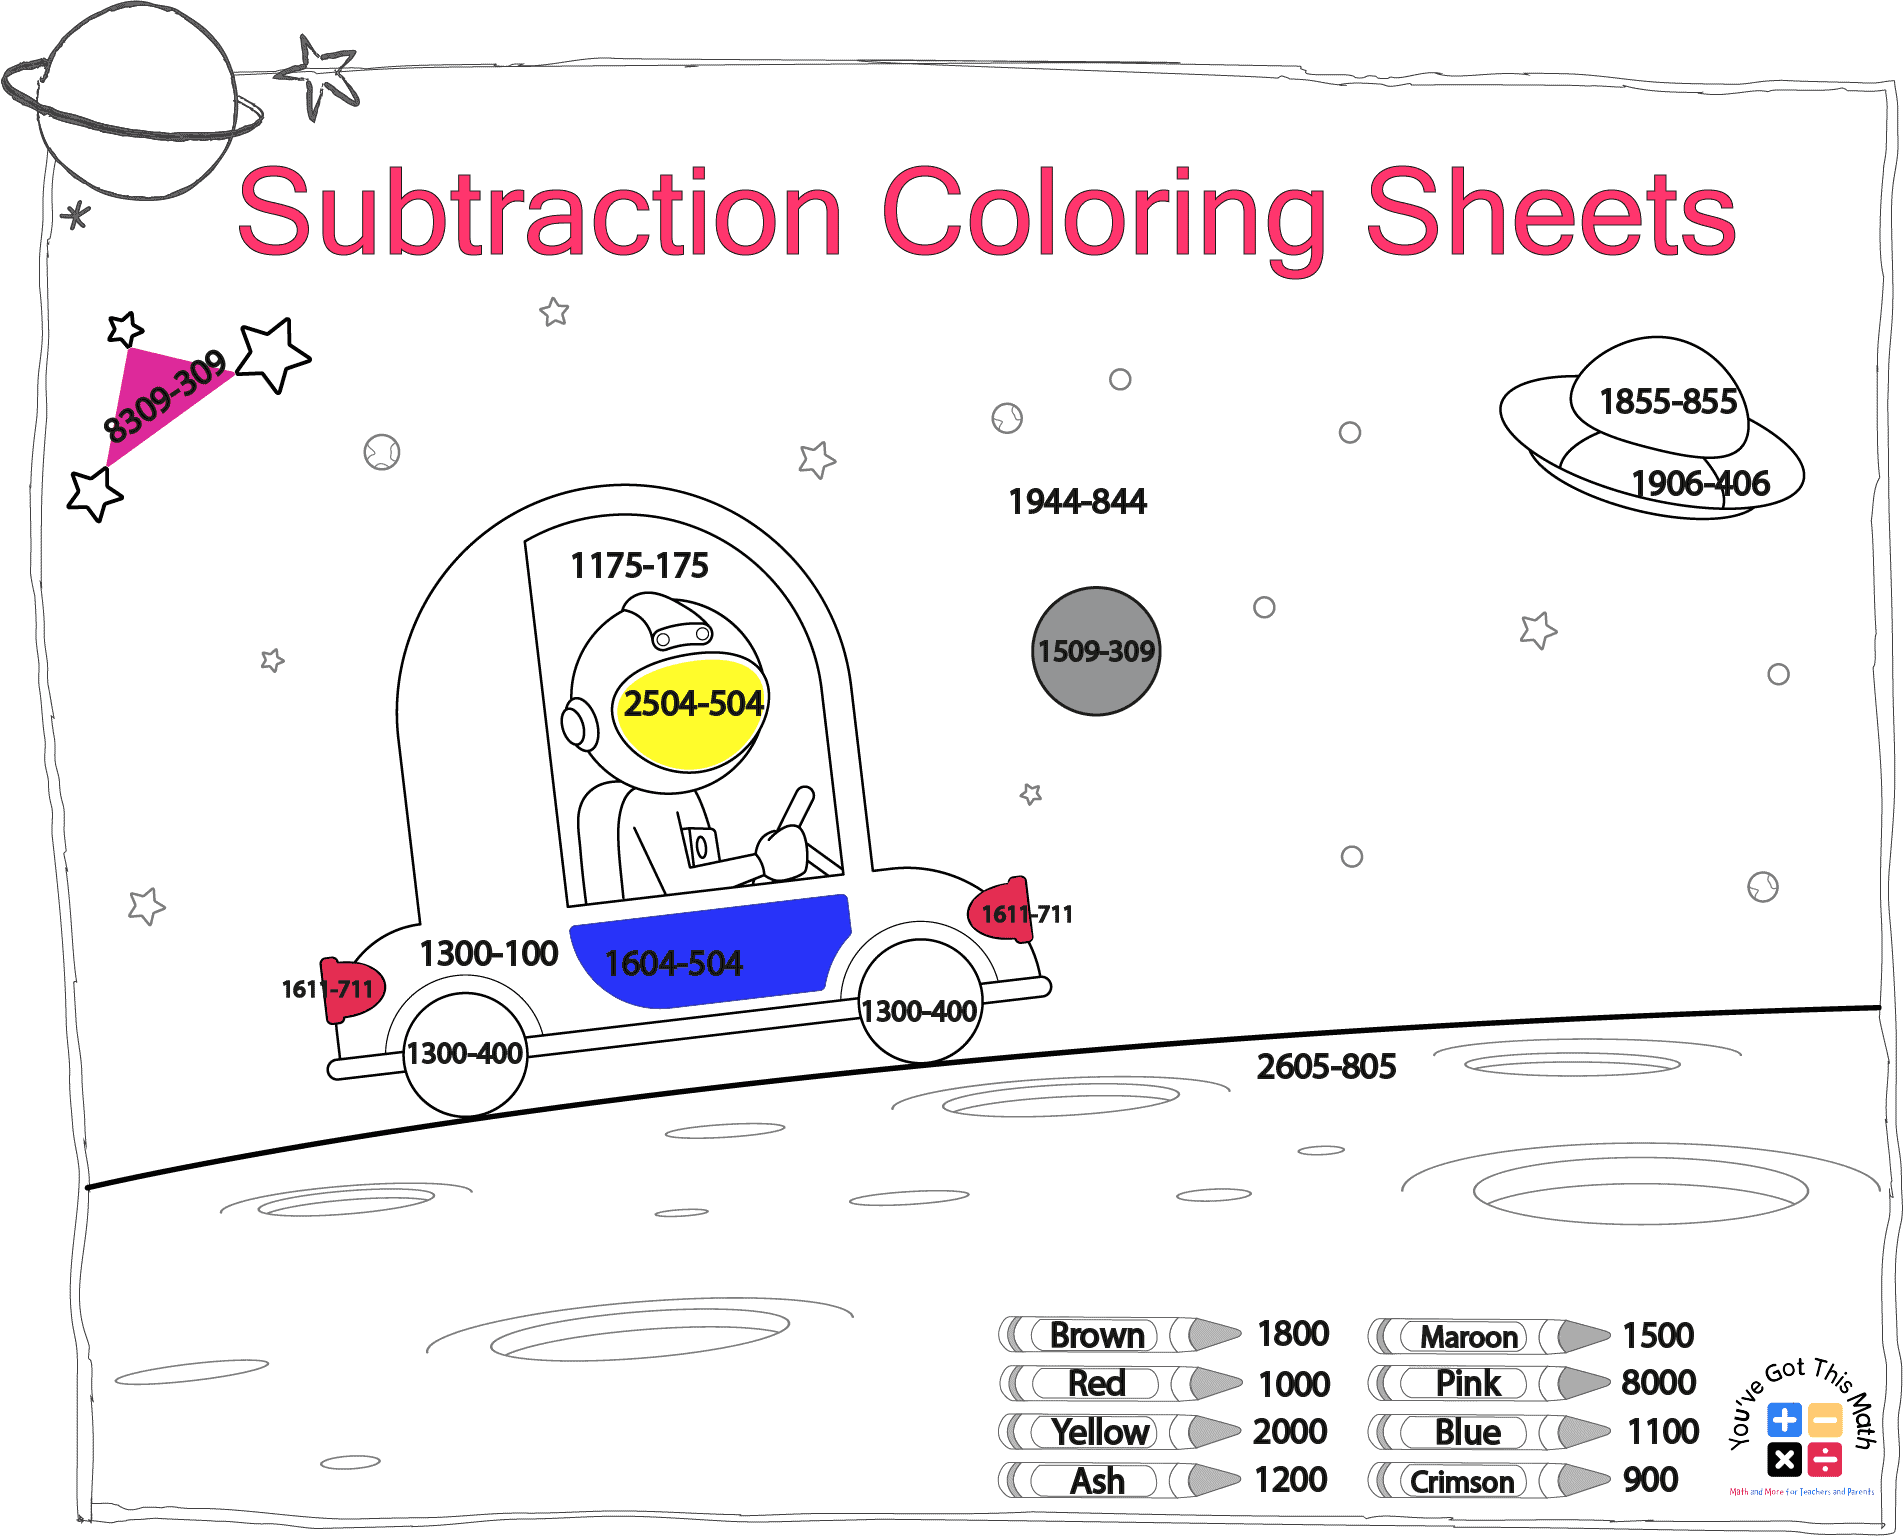 subtraction of 3 digits from 4 digits in subtraction coloring sheets